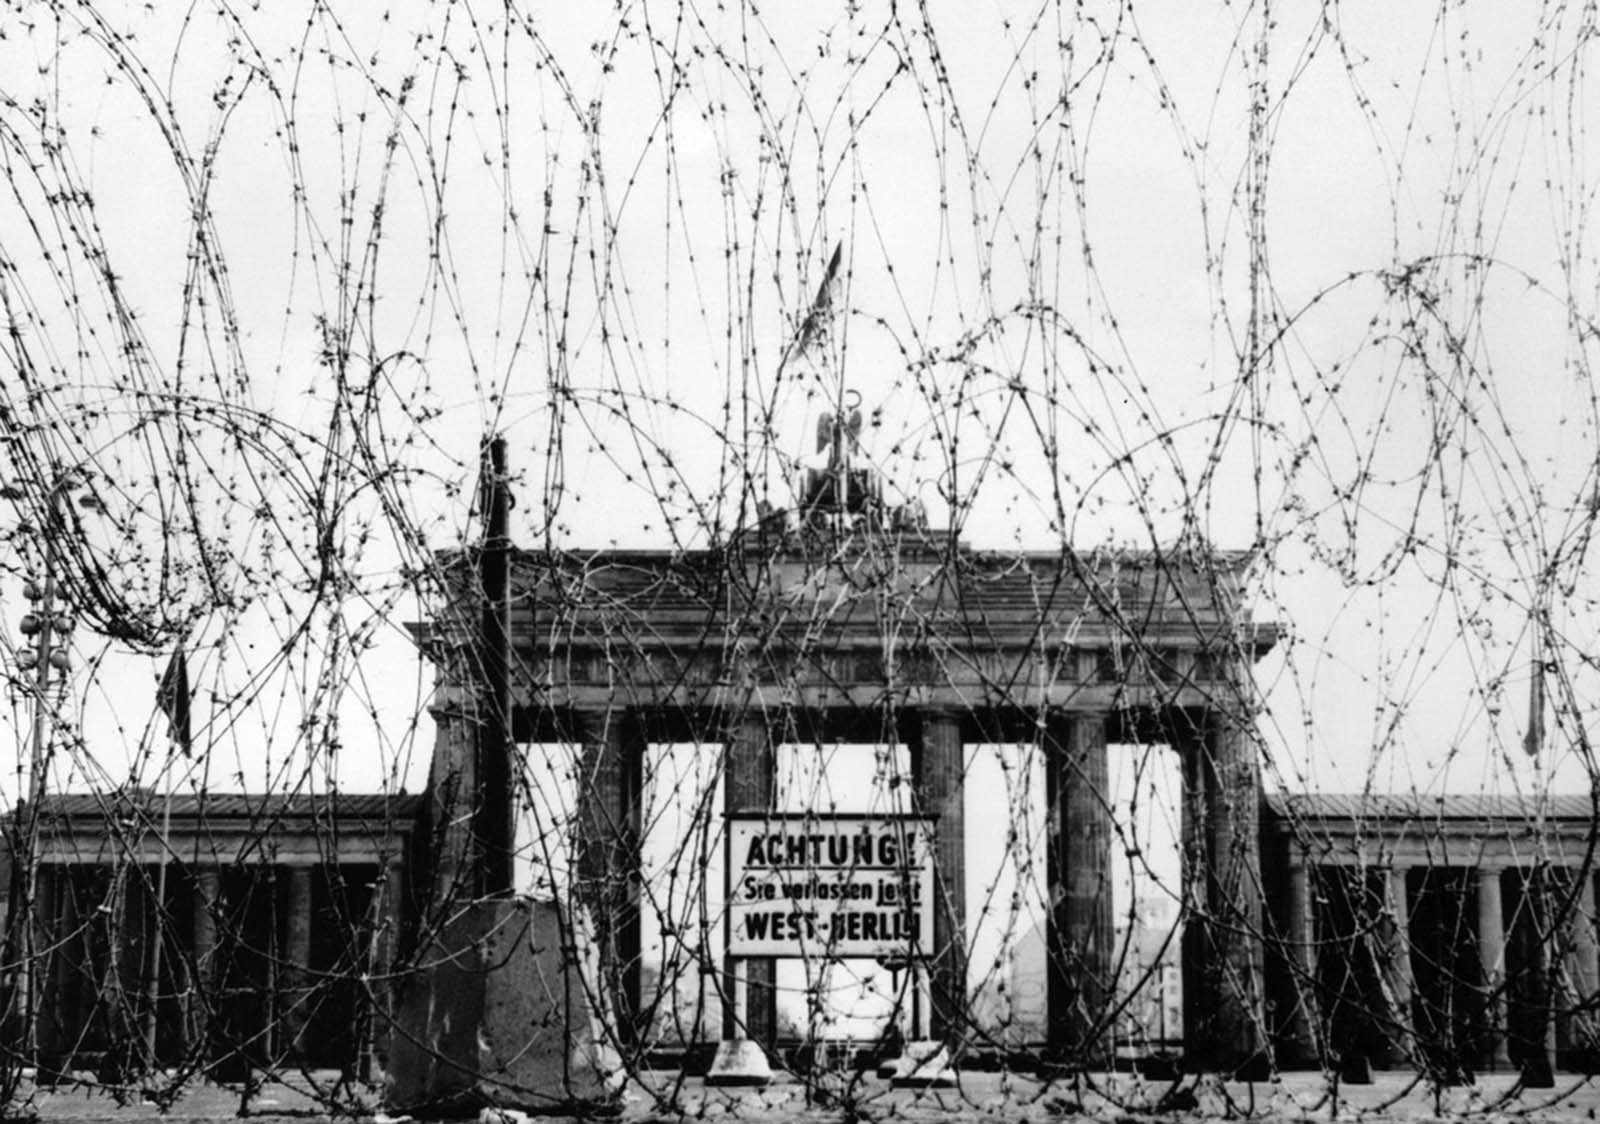 Barbed wire on the west side of the Brandenburg gate, put up as a “safety measure” by the British, photographed in November 1961.